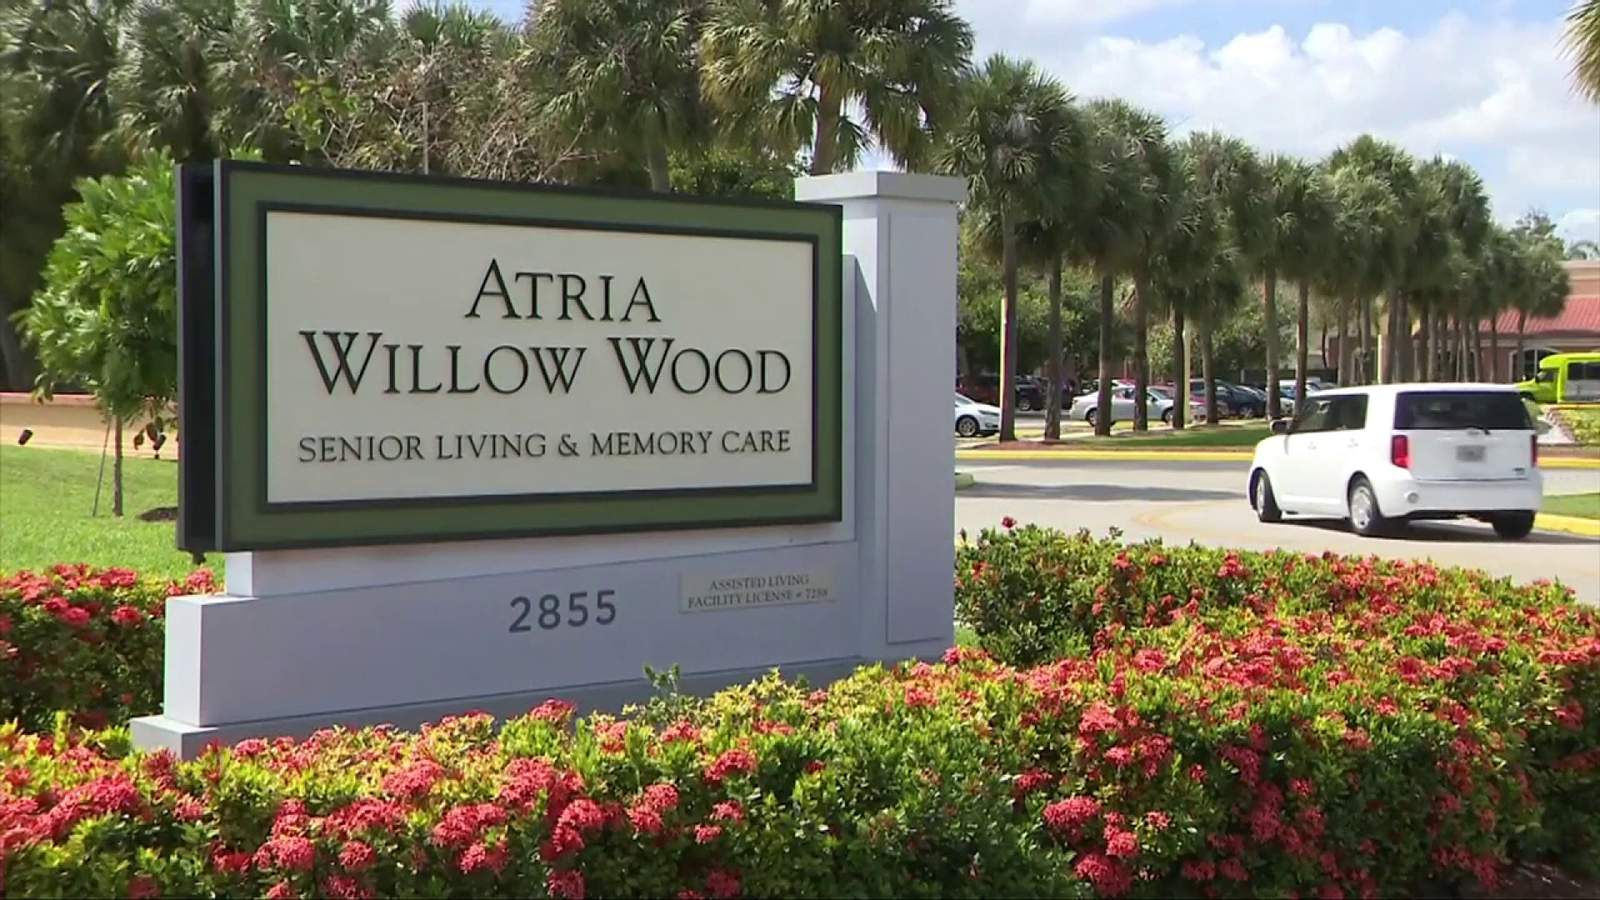 Coronavirus cases at Atria Willow Wood in Broward continue to increase after 6 die of COVID-19